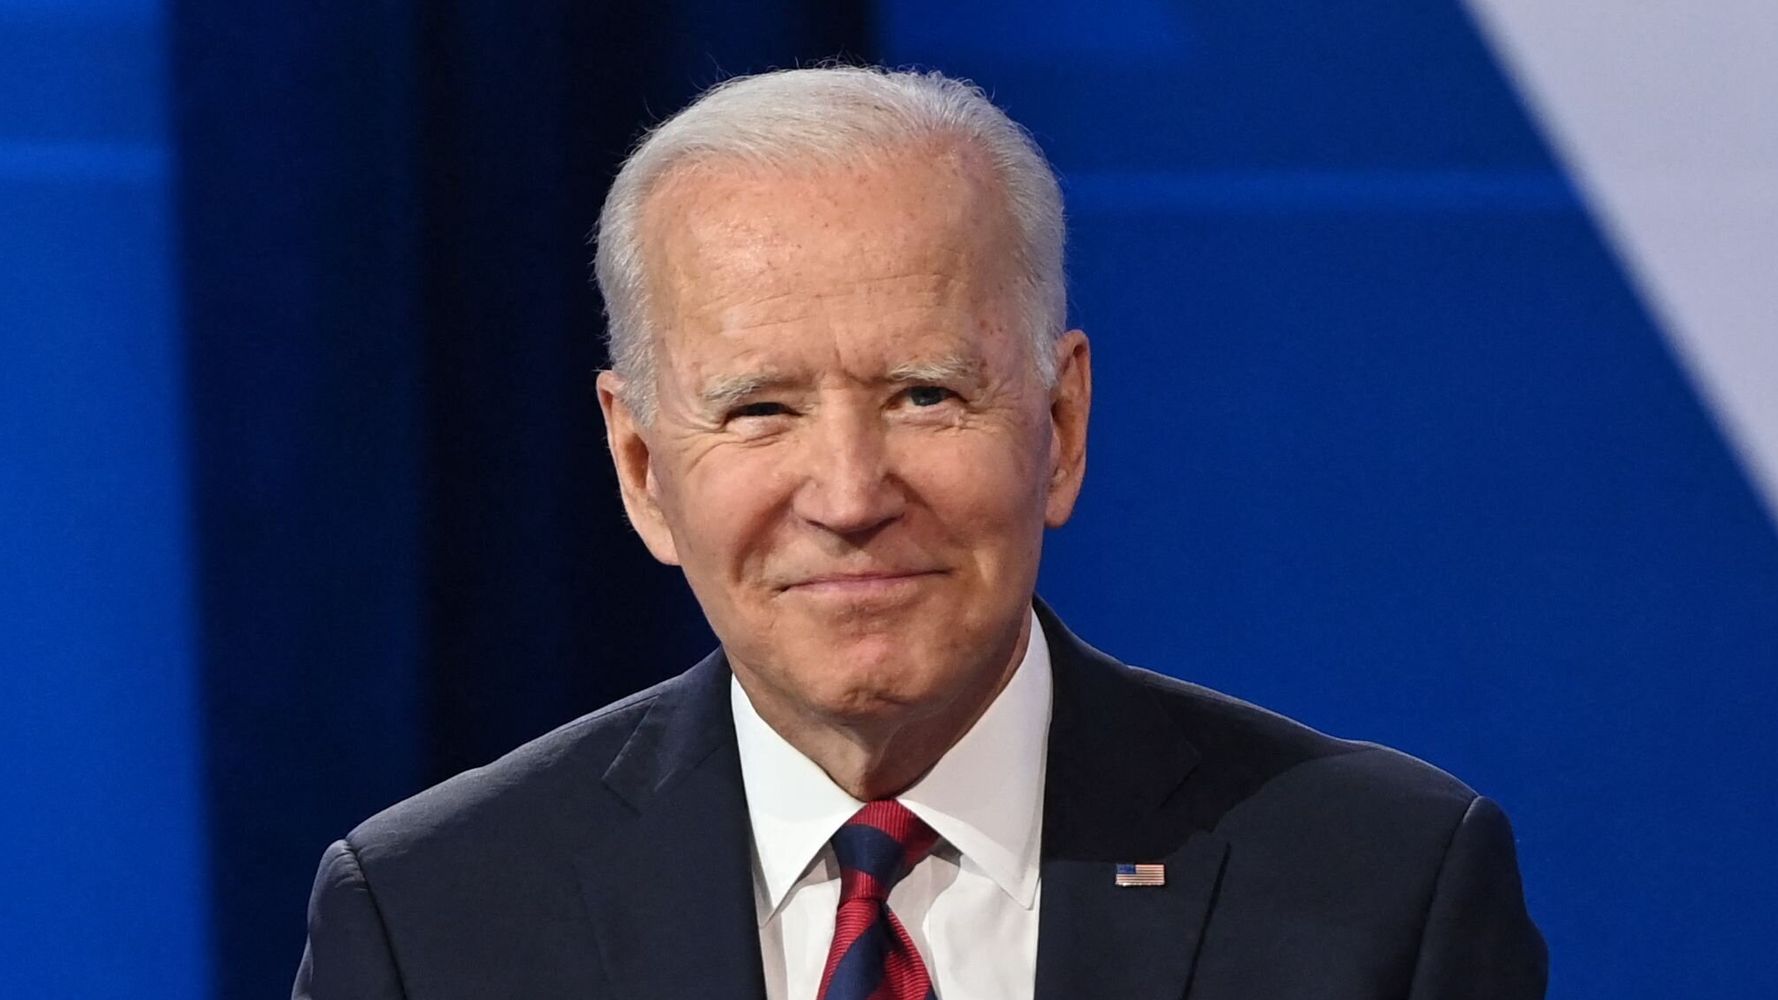 Biden Hopes For Full FDA Approval Of COVID-19 Vaccines ‘Soon’; Jabs For Kids May Follow